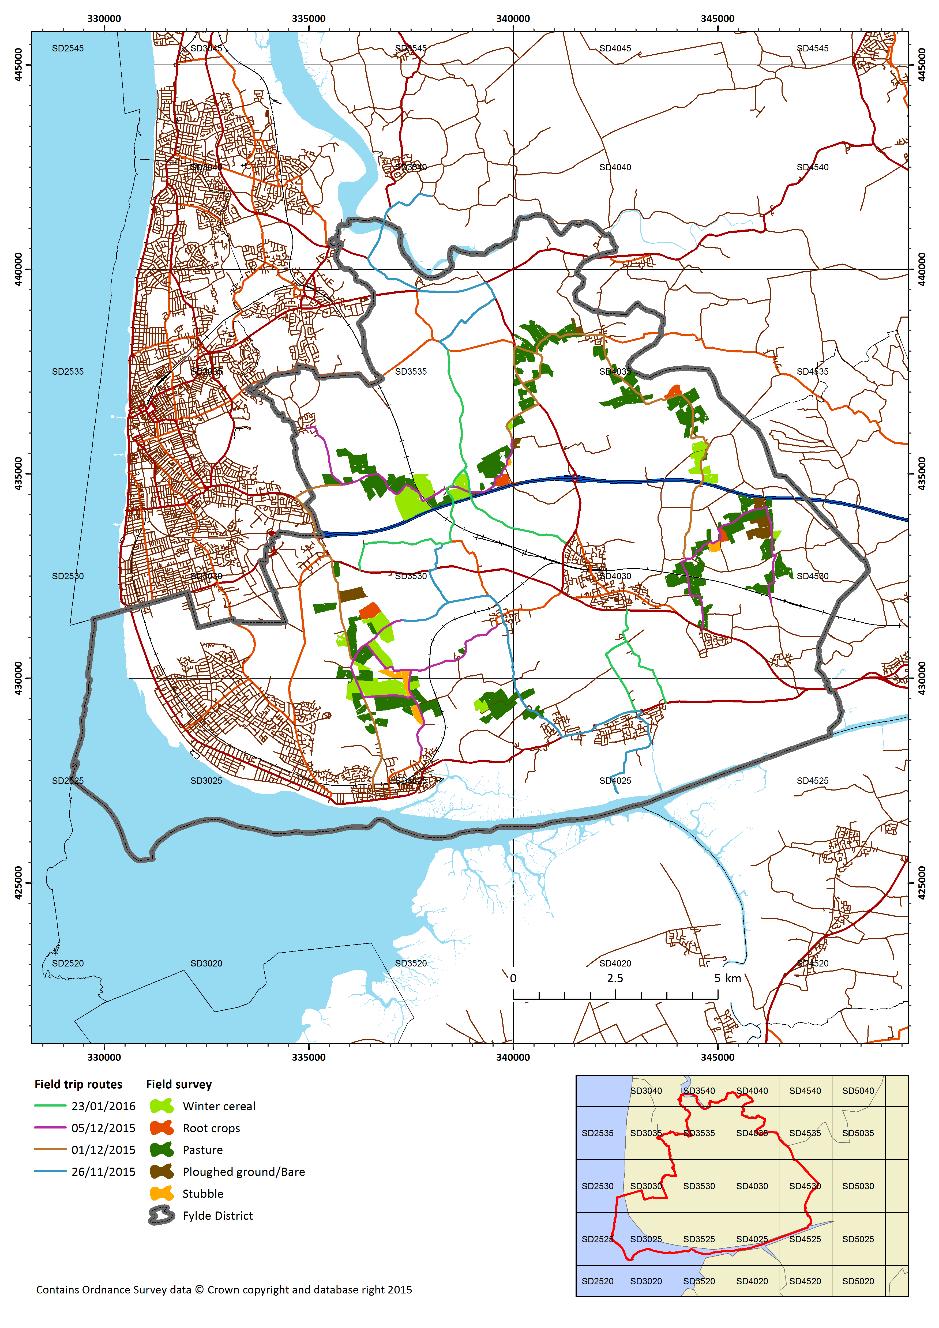 Figure 4.2. Location and types of fields surveyed during pilot field trips within Fylde district.